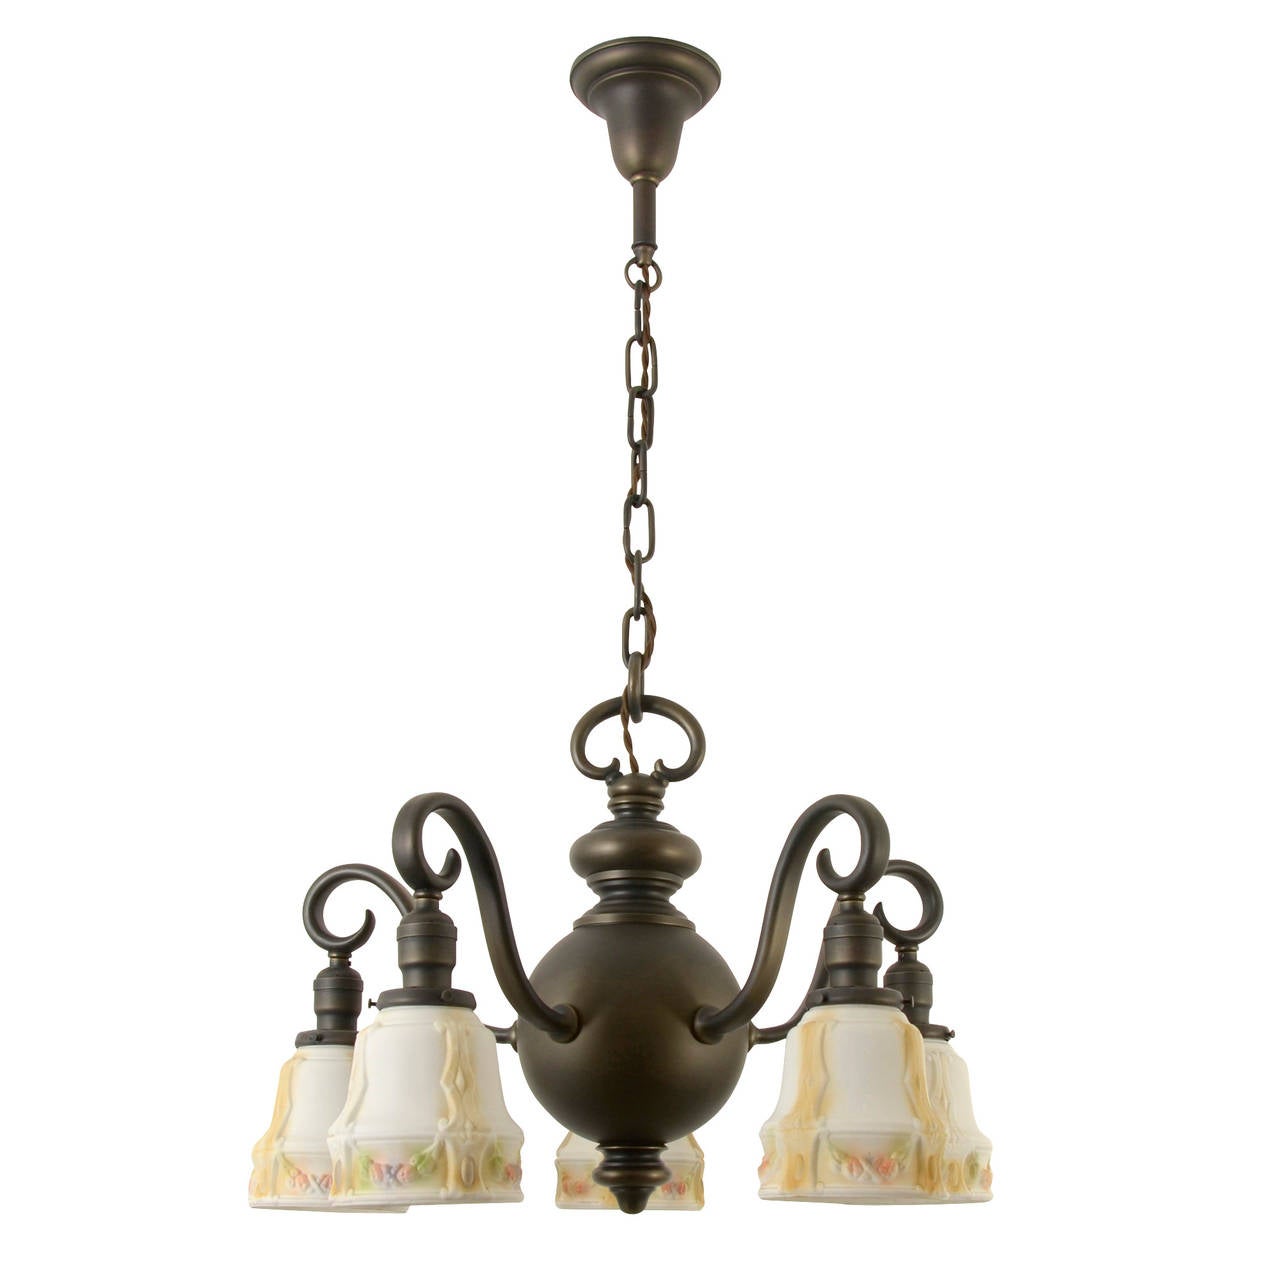 American Colonial Elegant and Refined Colonial Revival Chandelier, circa 1920